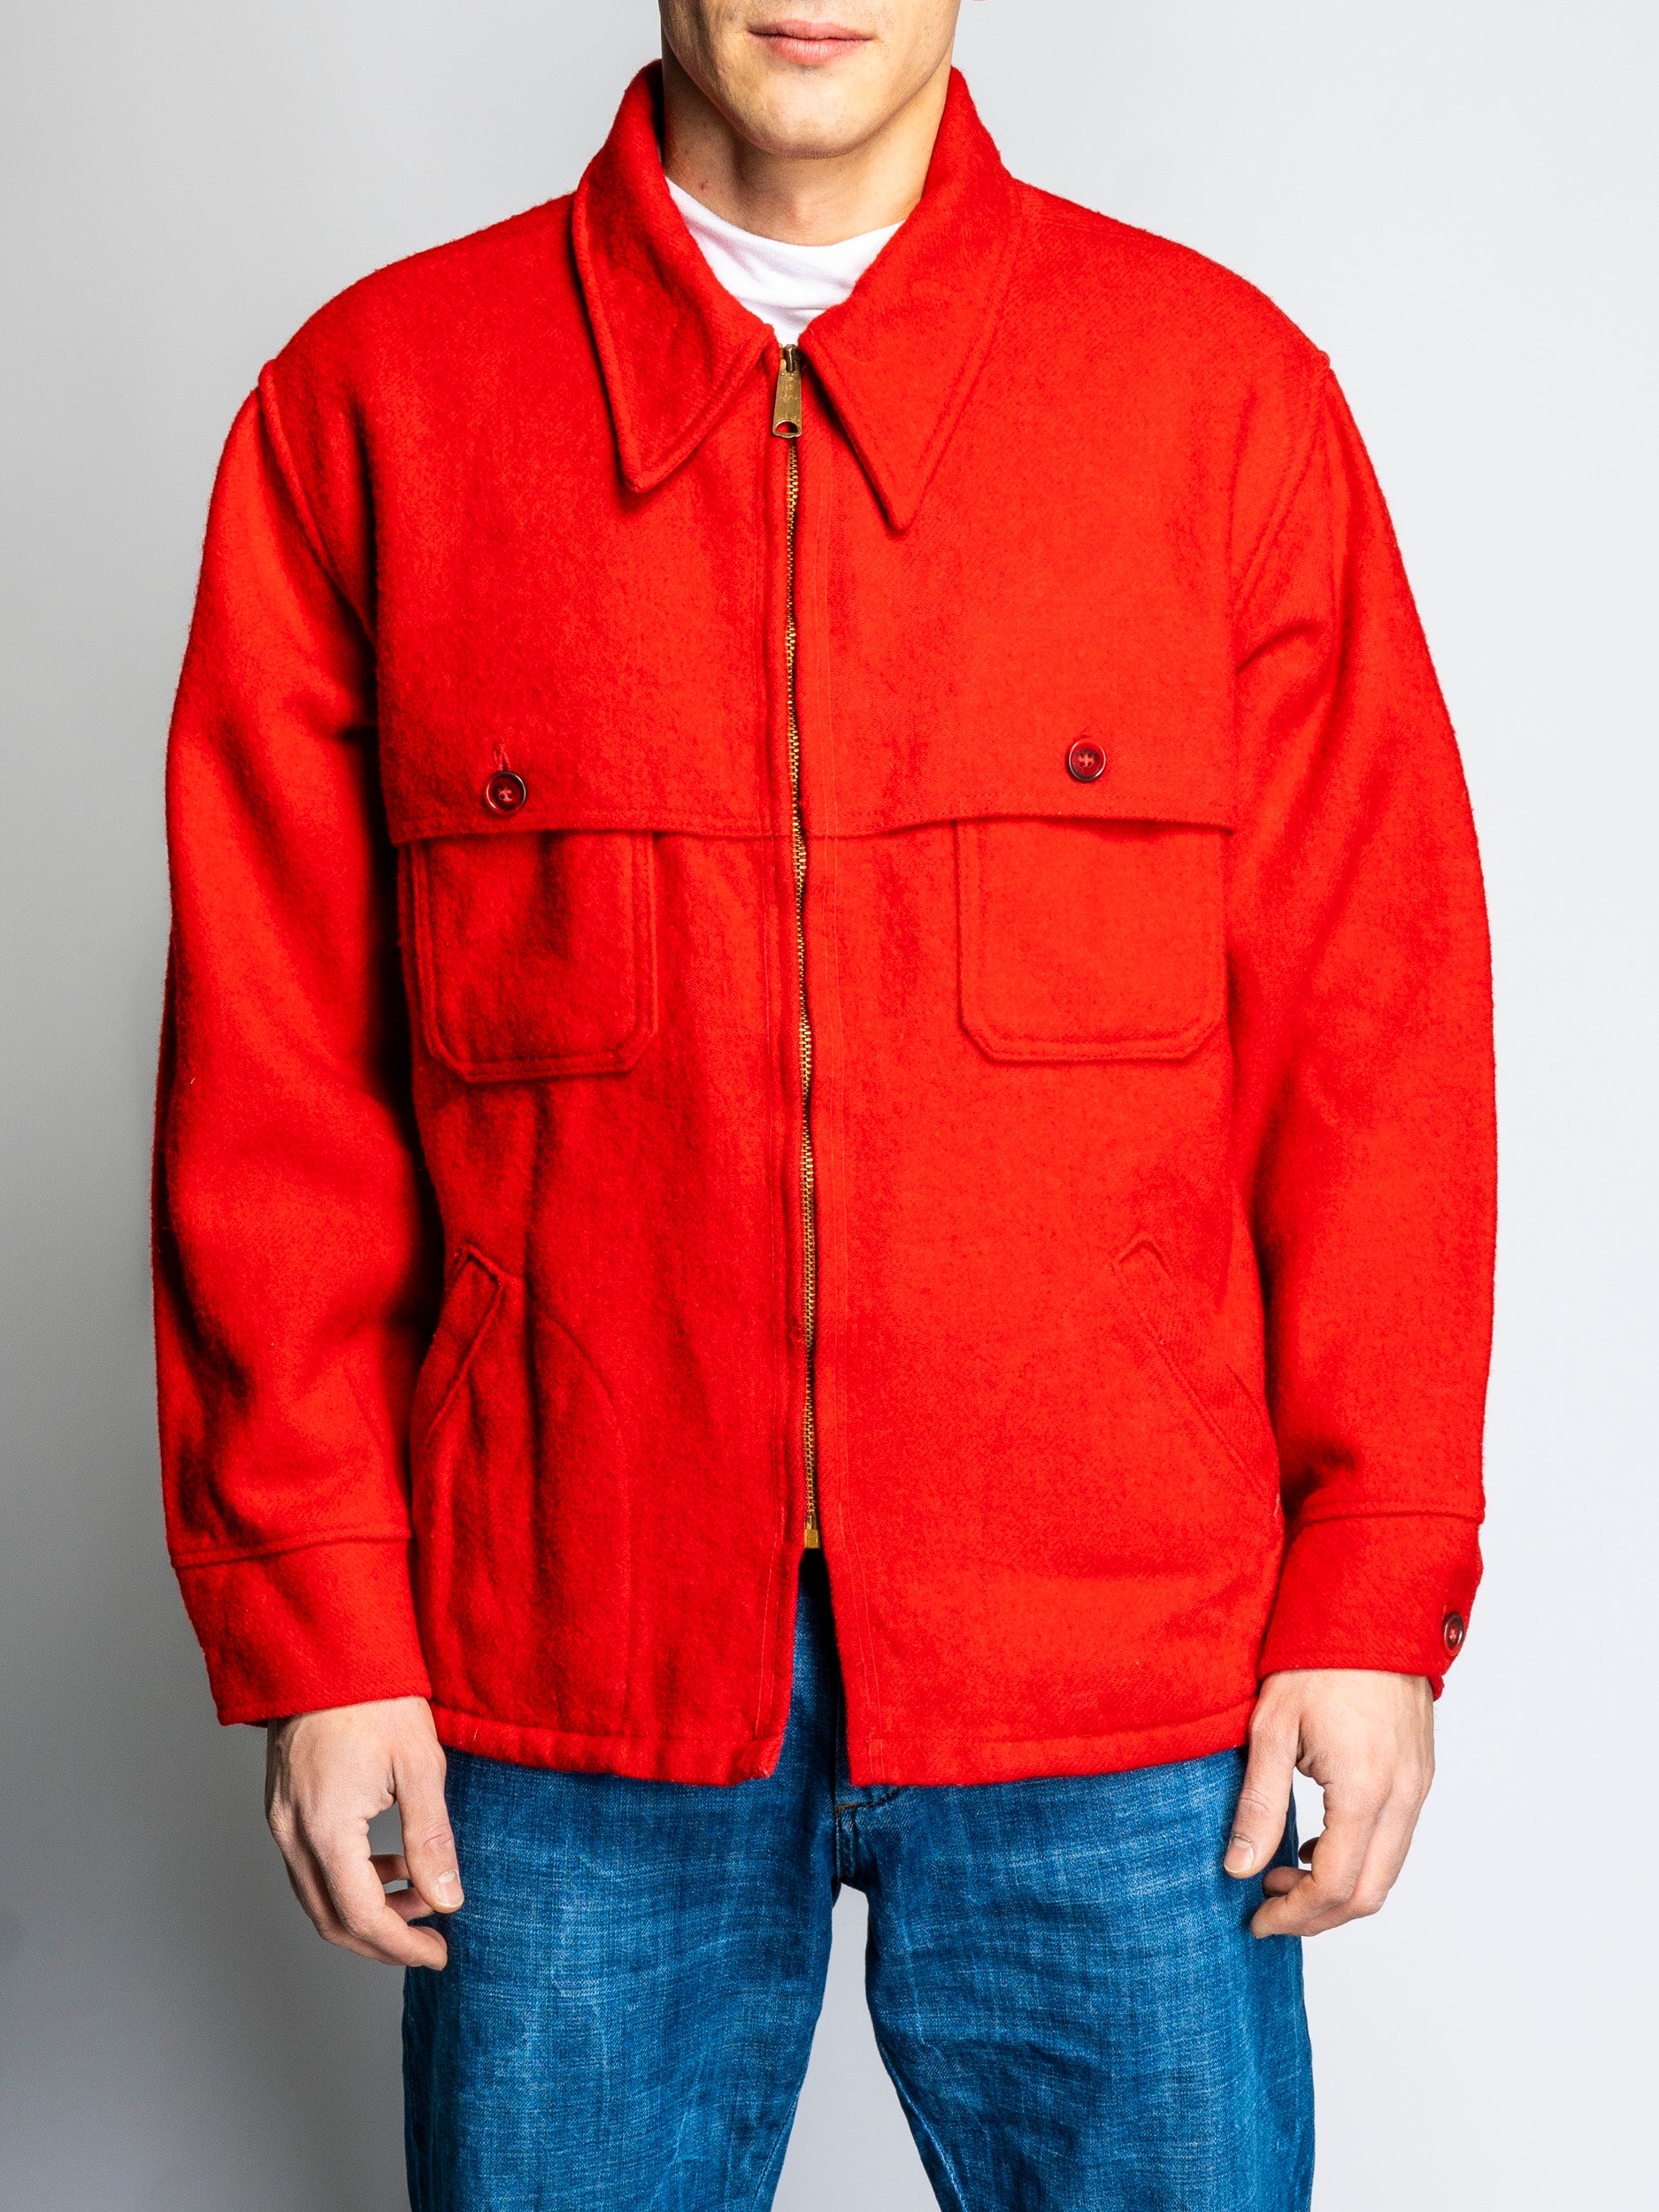 VINTAGE RED JACKET FROM THE 70S